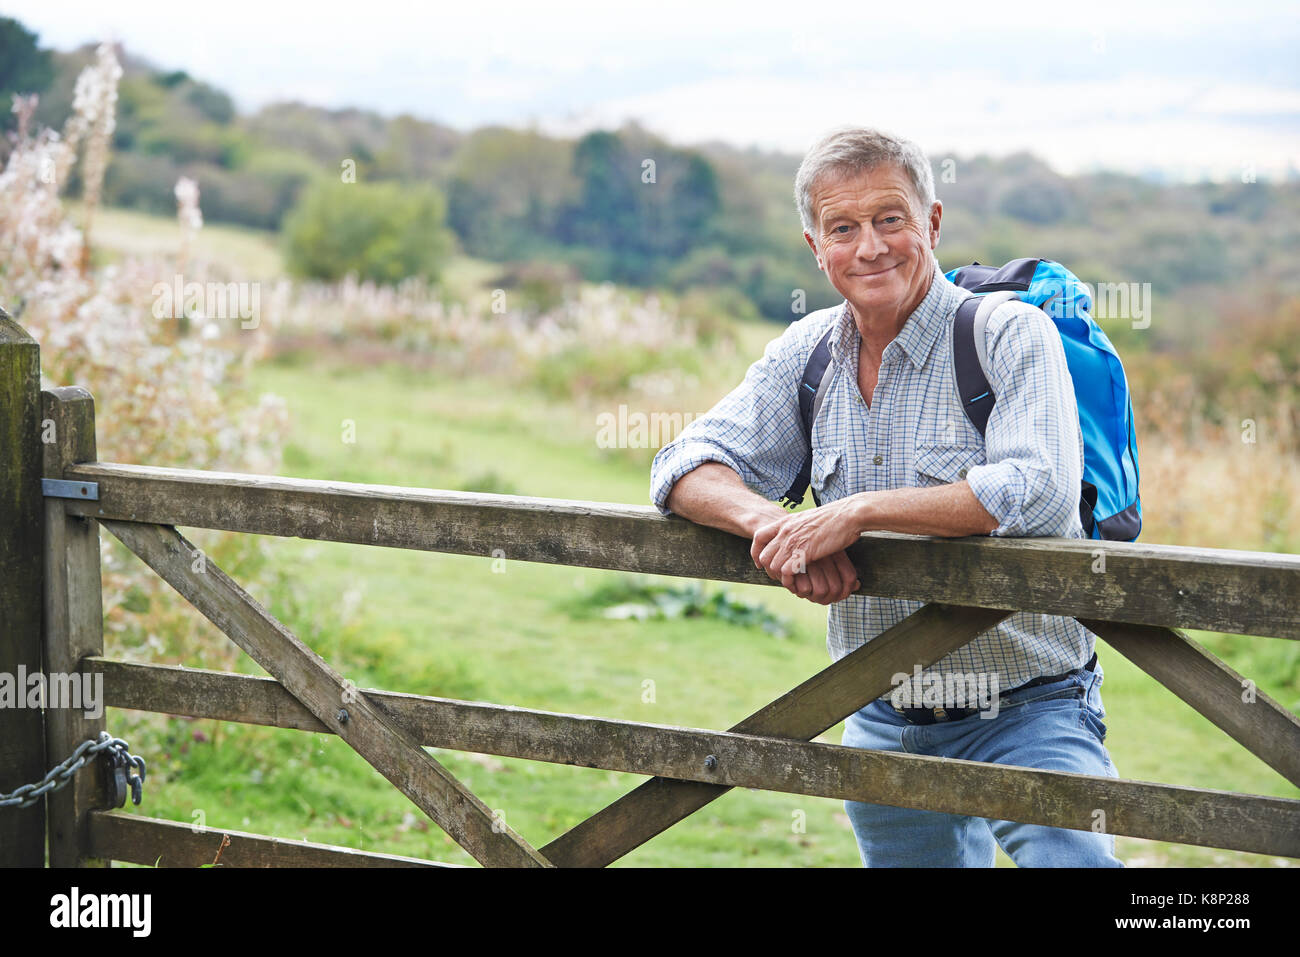 Portrait Of Senior Man On Hike In Countryside Resting By Gate Stock Photo